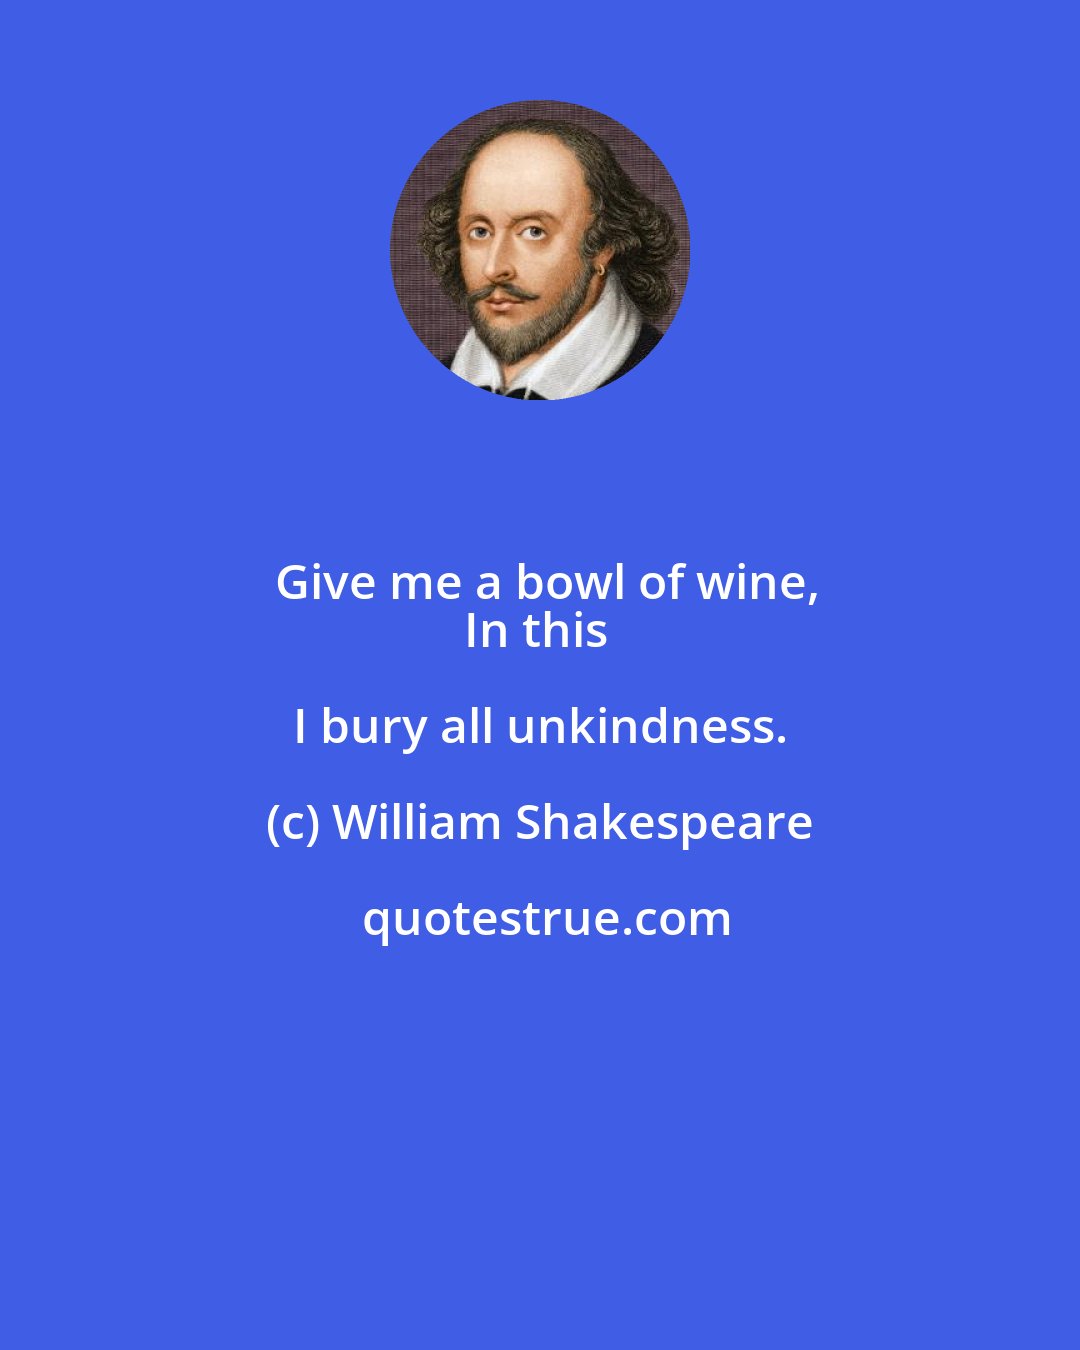 William Shakespeare: Give me a bowl of wine,
In this I bury all unkindness.